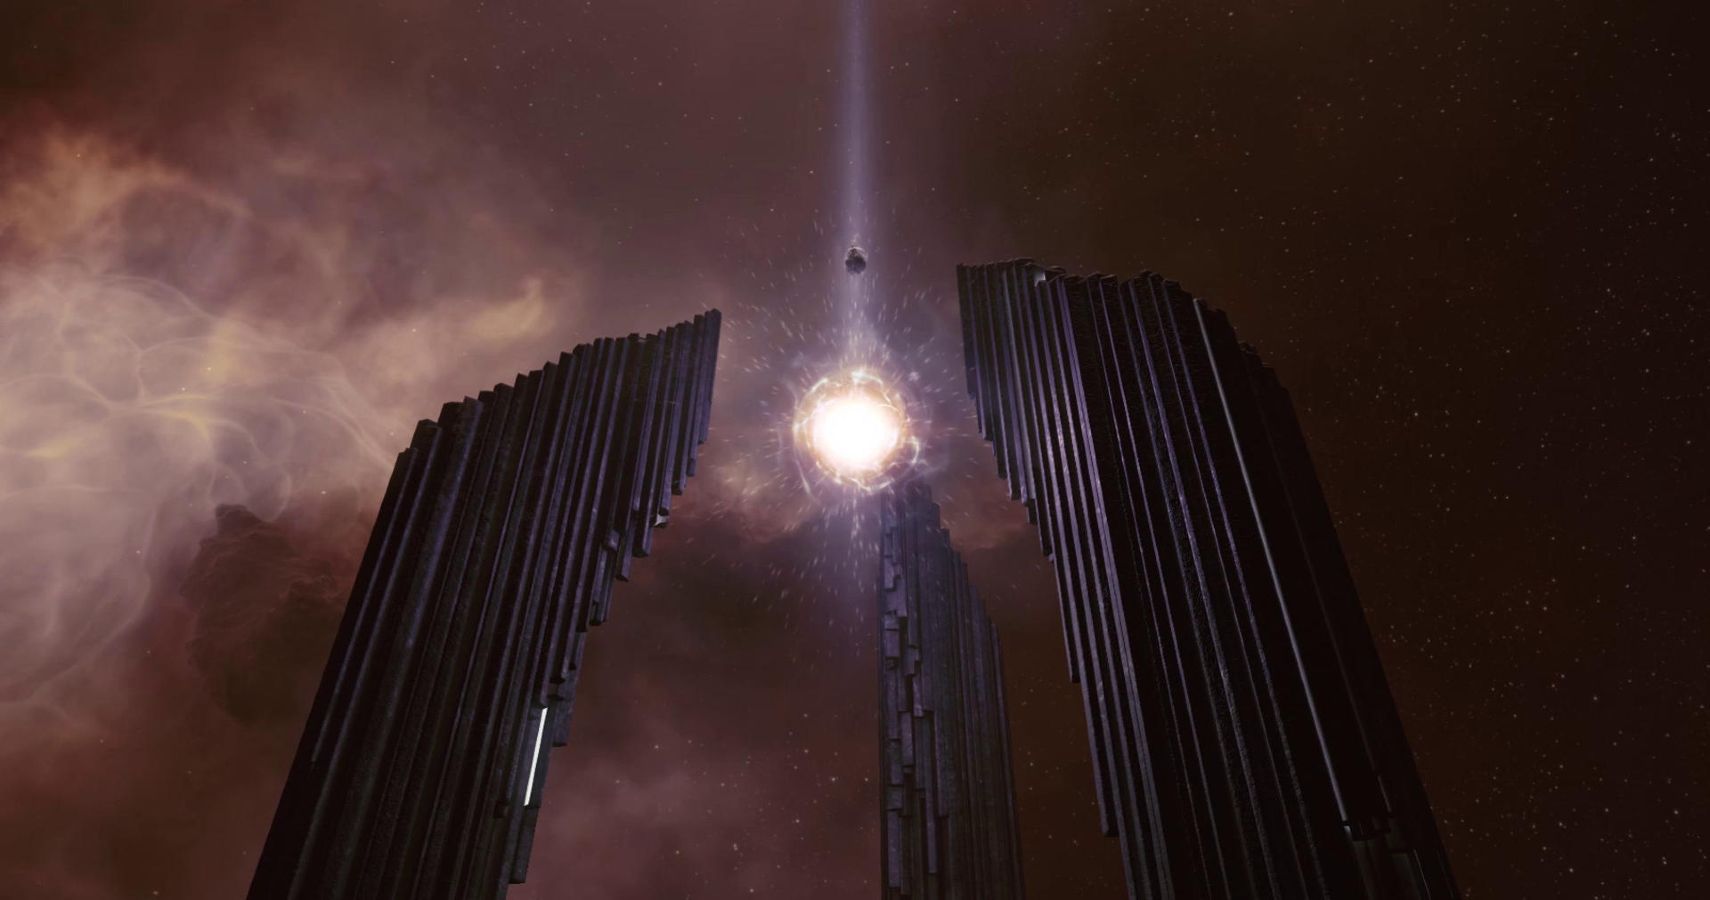 Eve Online Now Has A Permanent InGame Cemetery